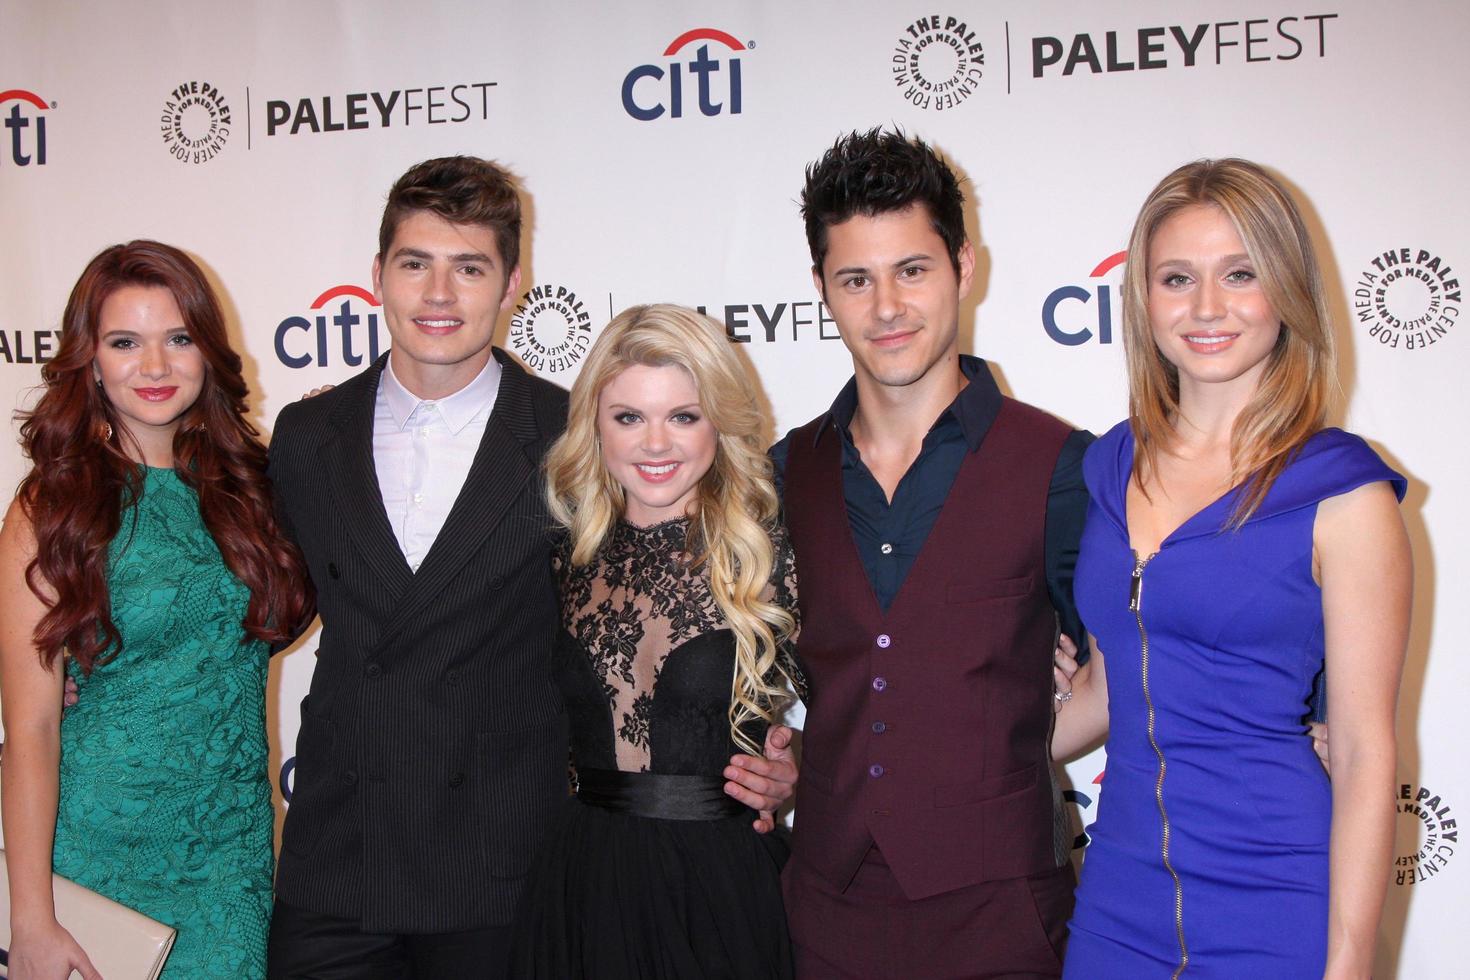 LOS ANGELES, SEP 12 -  Katie Stevens, Gregg Sulkin, Bailey De Young, Michael J. Willett, Rita Volk at the PaleyFest Fall Preview, MTV s Faking It at Paley Center for Media on September 12, 2014 in Beverly Hills, CA photo